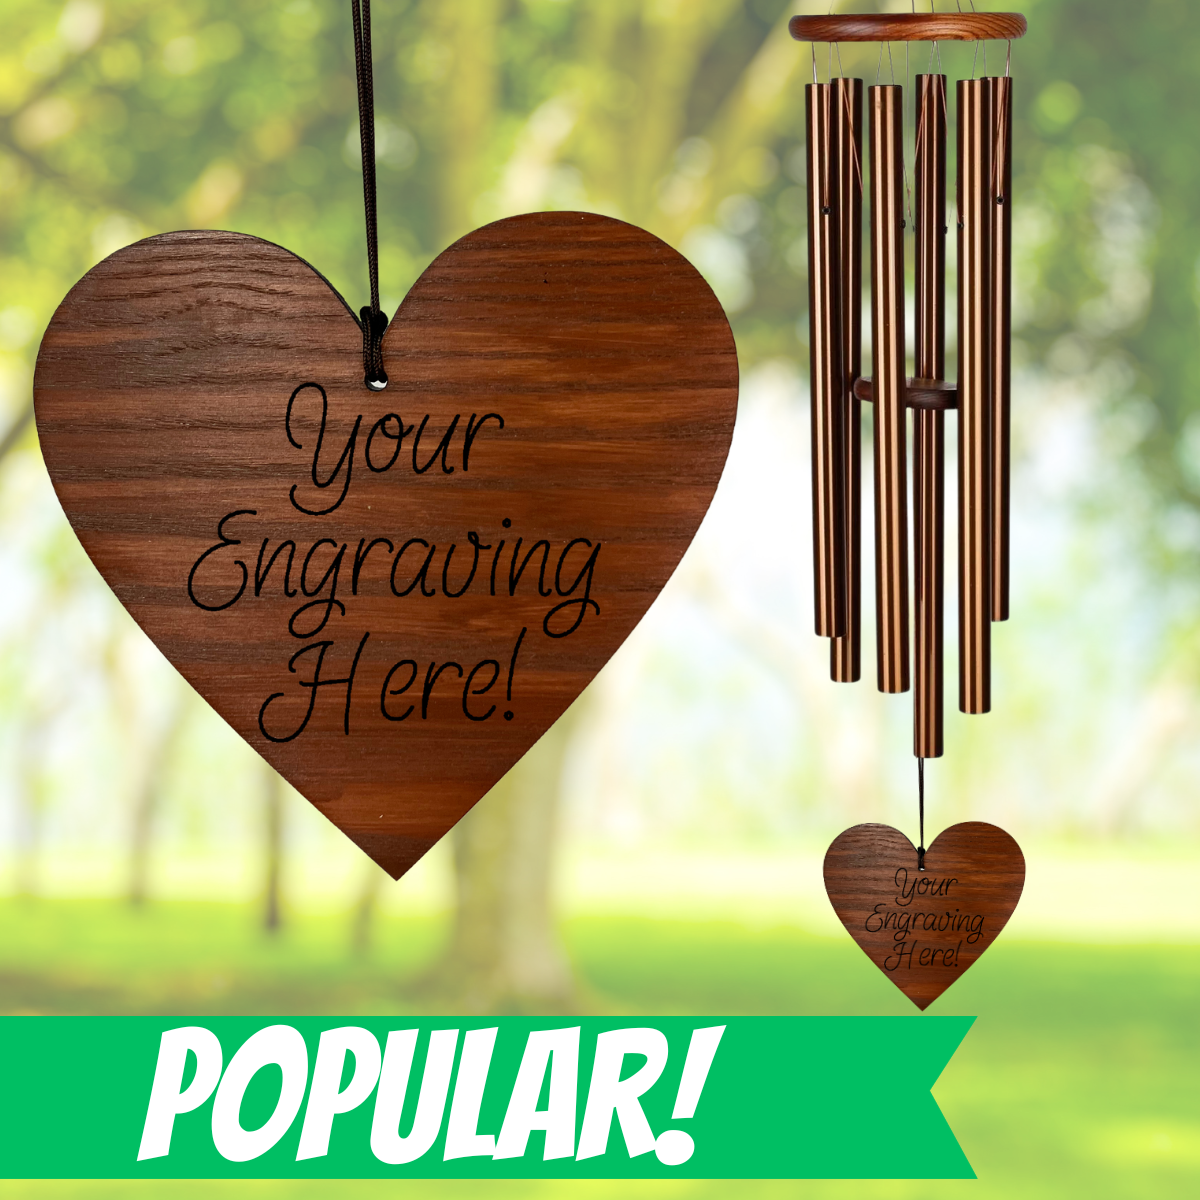 AMAZING GRACE 40 INCH WIND CHIME - ENGRAVABLE HEART SAIL - BRONZE